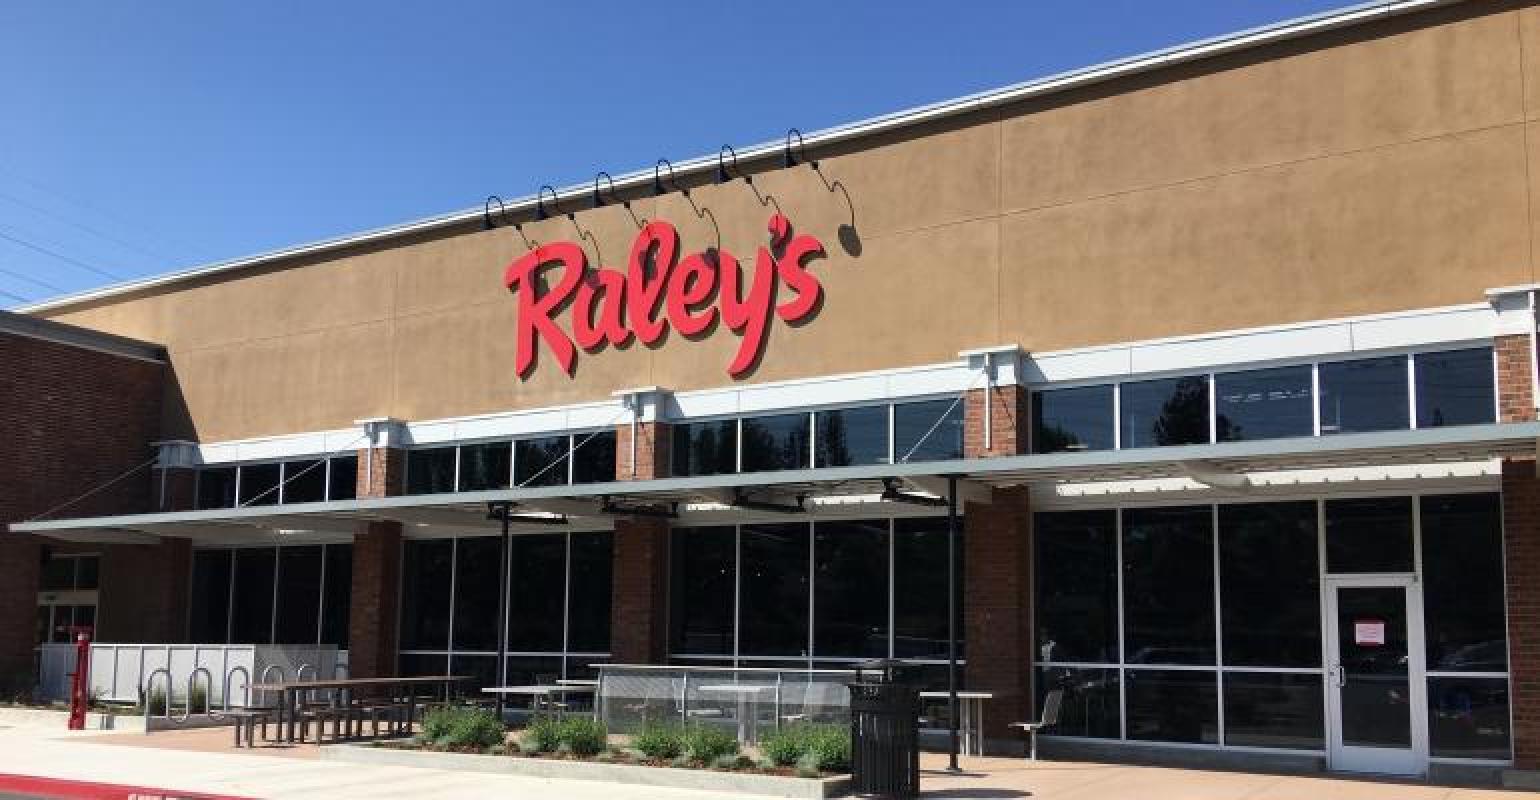 Raley's enlists DoorDash for grocery delivery